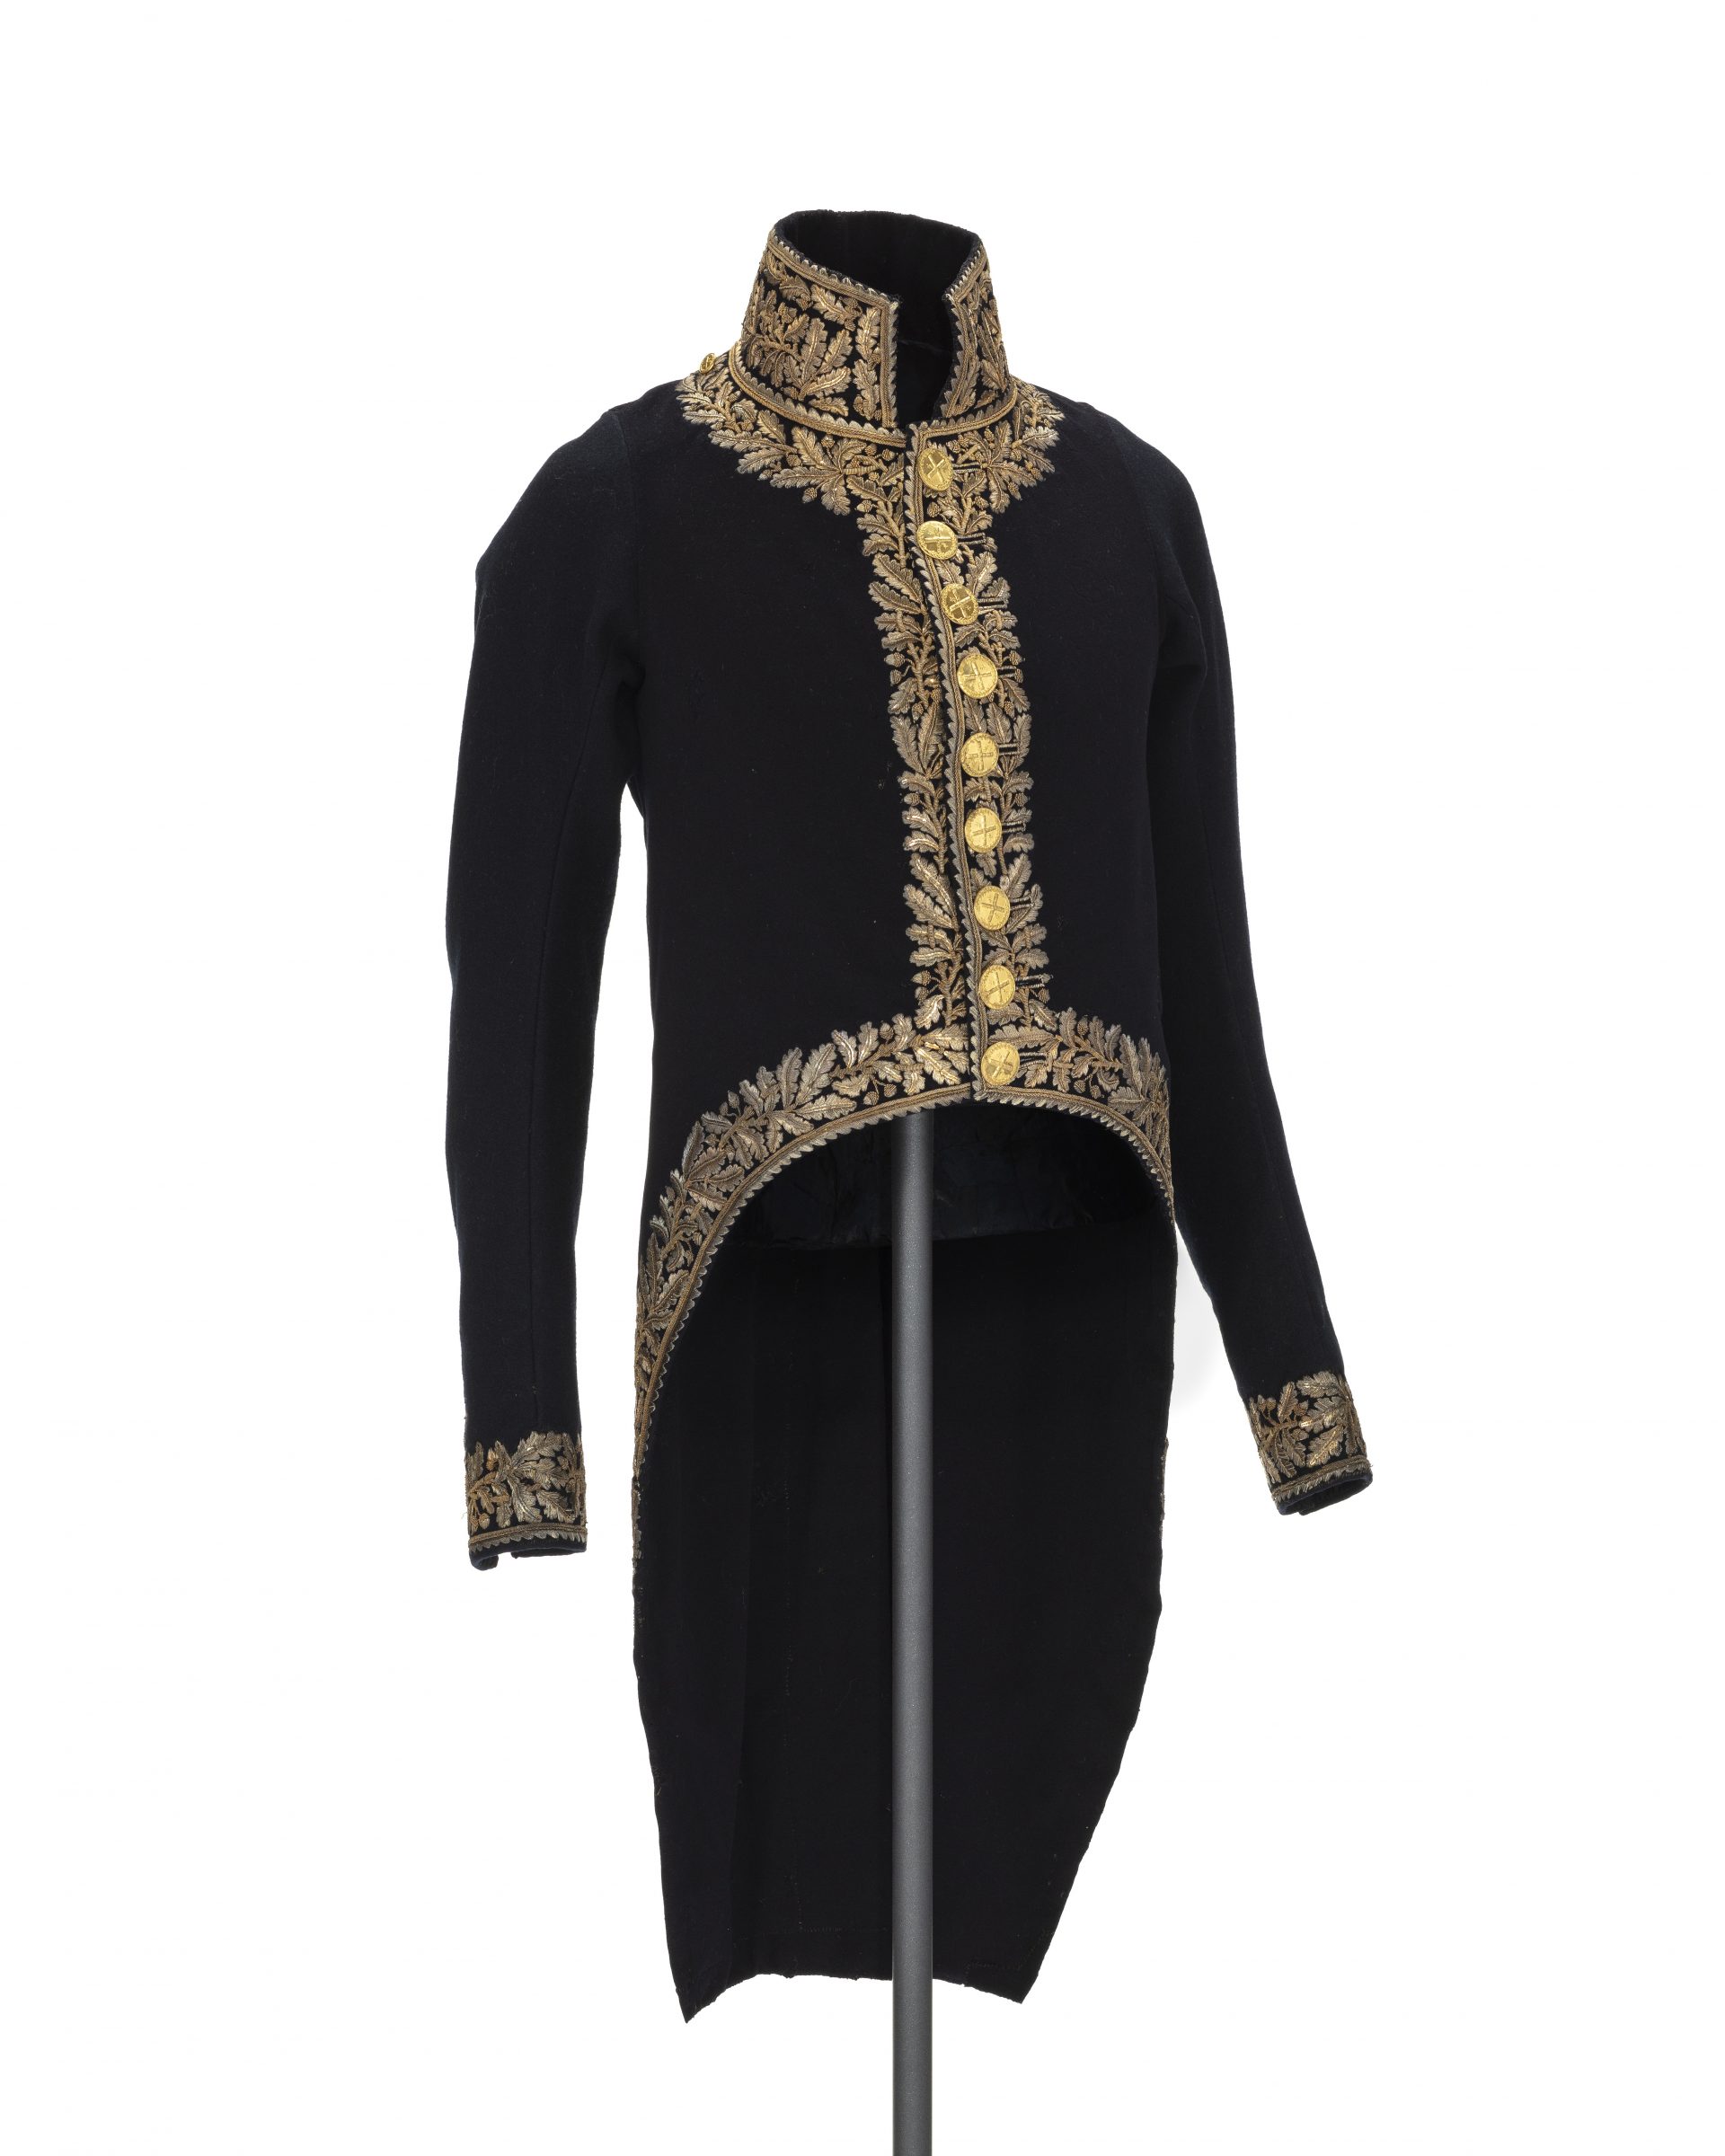 A black tailcoat with gold embroidery.